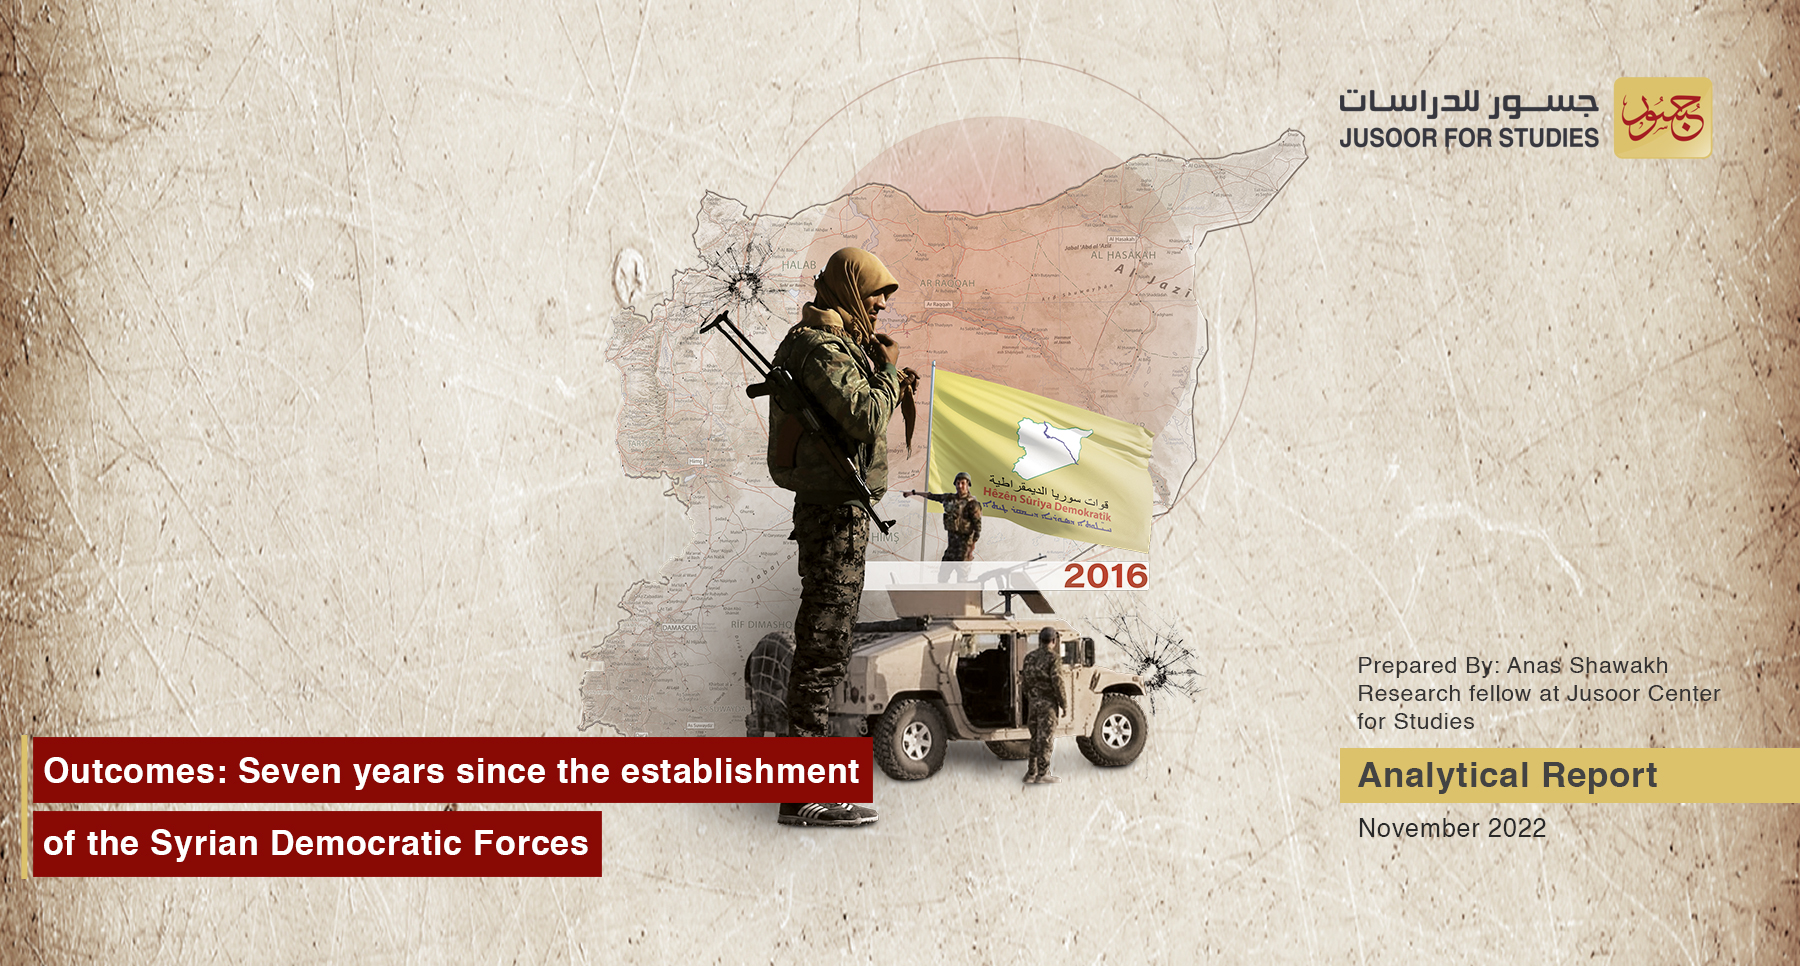 Outcomes: Seven years since the establishment of the Syrian Democratic Forces